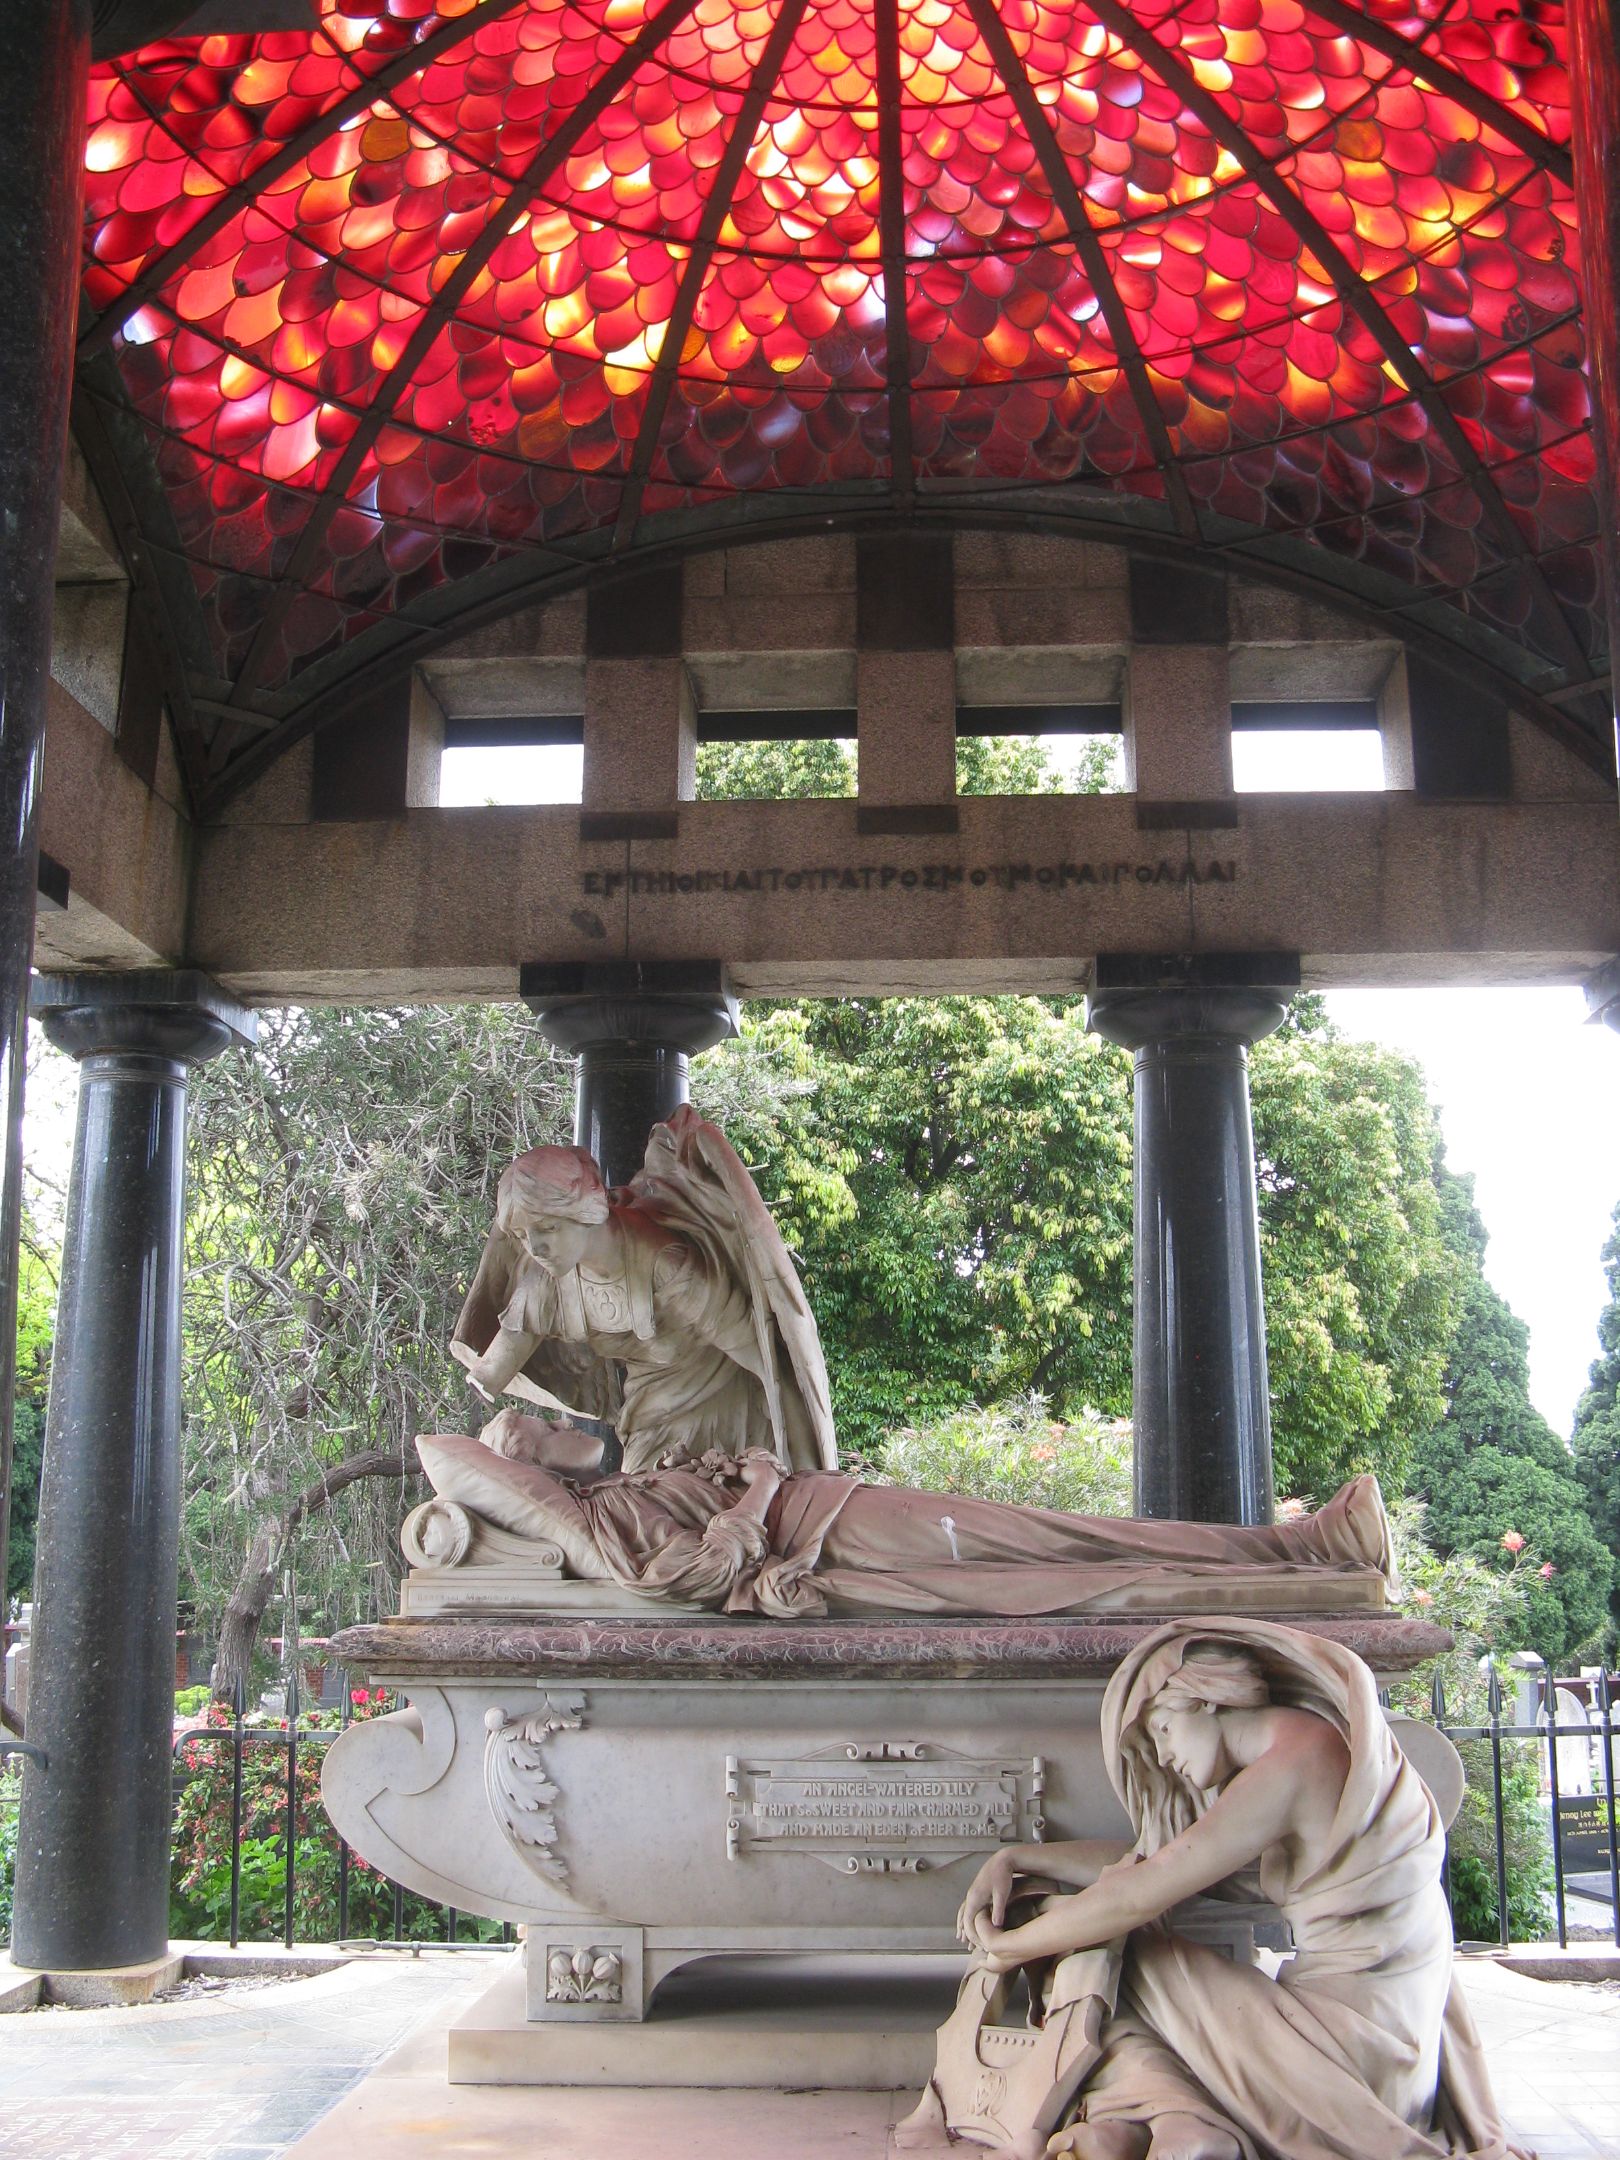 A statue consisting of a man lying down on a bed, with an angel leaning over him and another woman crouched at the foot of the bed. All are dressed in ancient civilisation style clothes. The status is inside a rotunda in a park with red stained glass on the roof. 